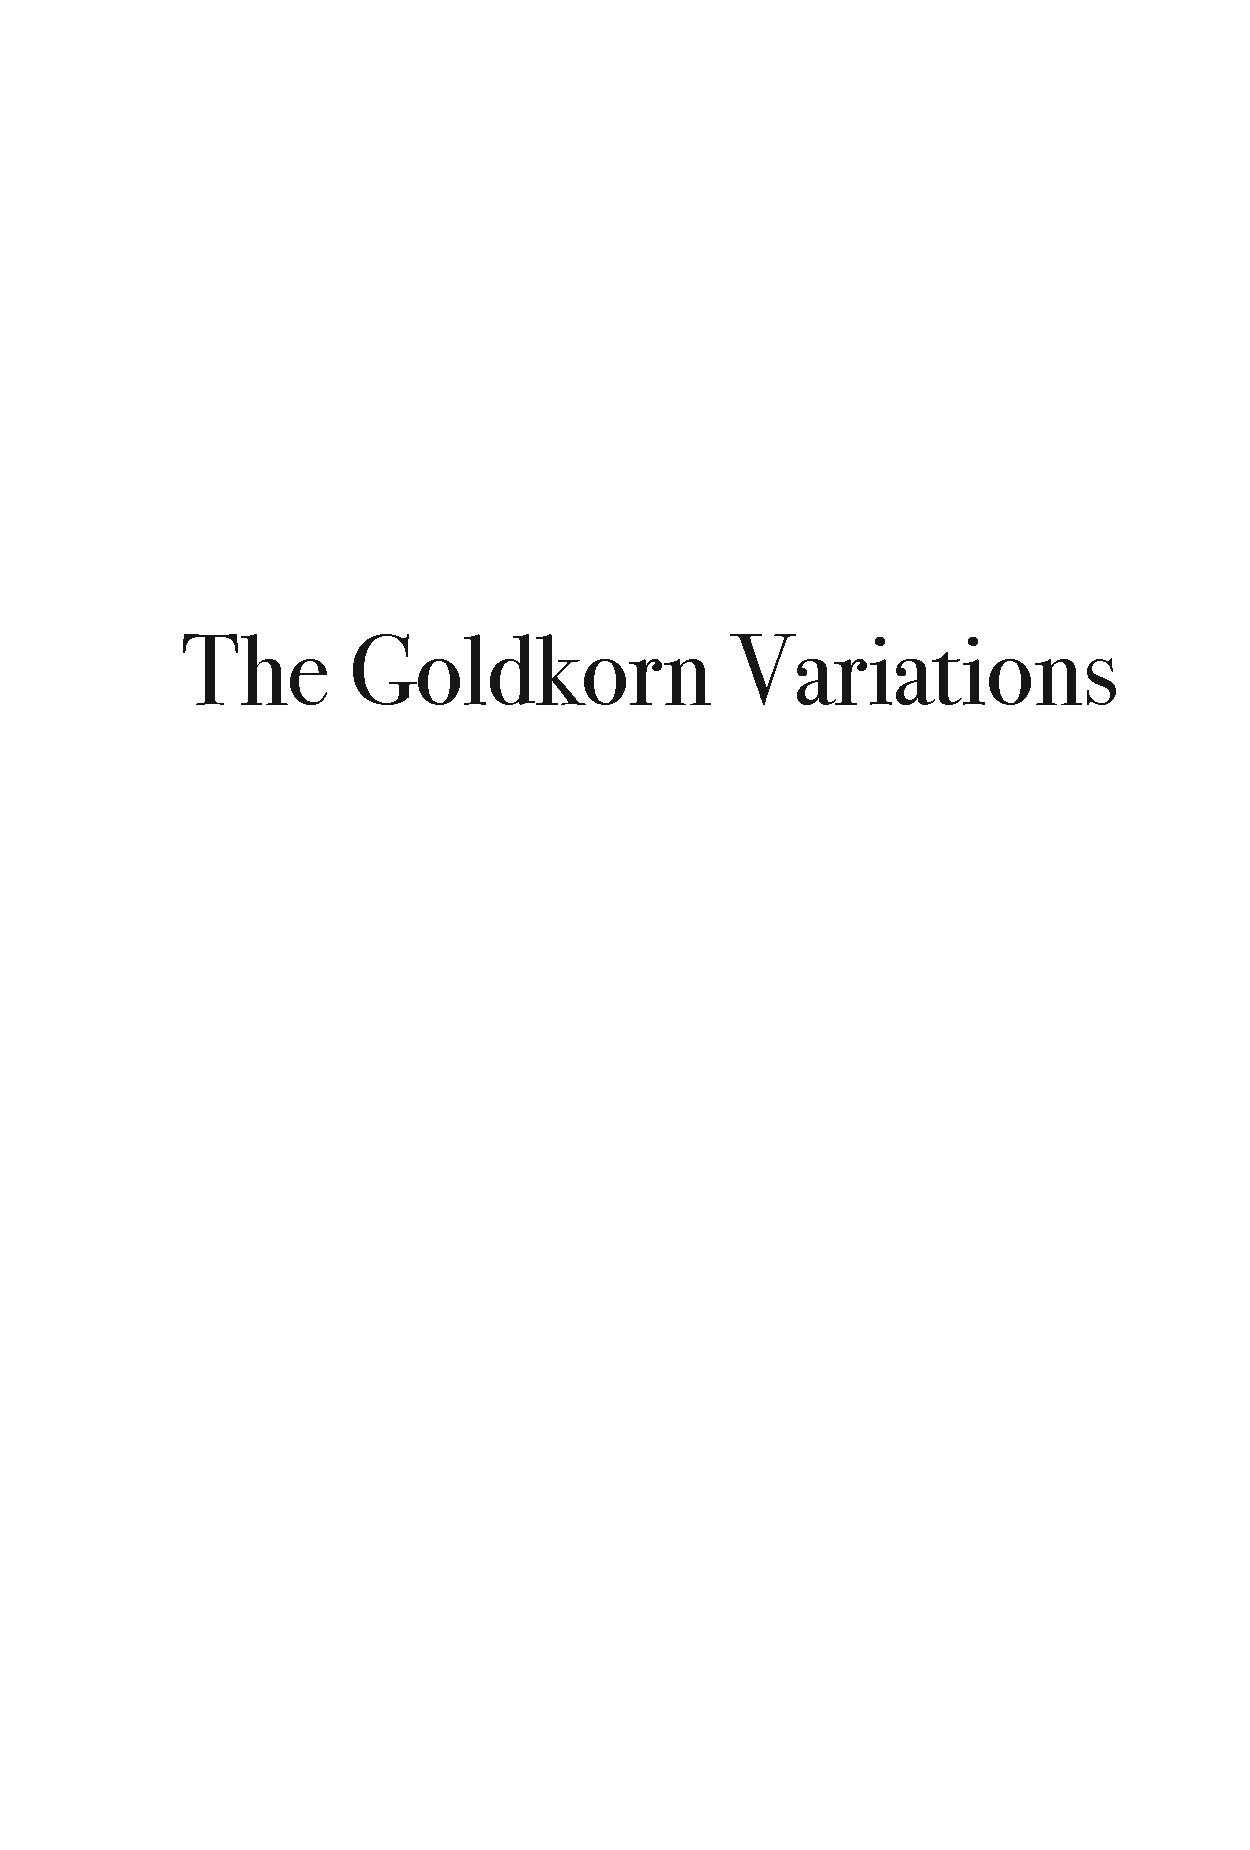 Preview Pages The Goldkorn Variations_Page_02.jpg